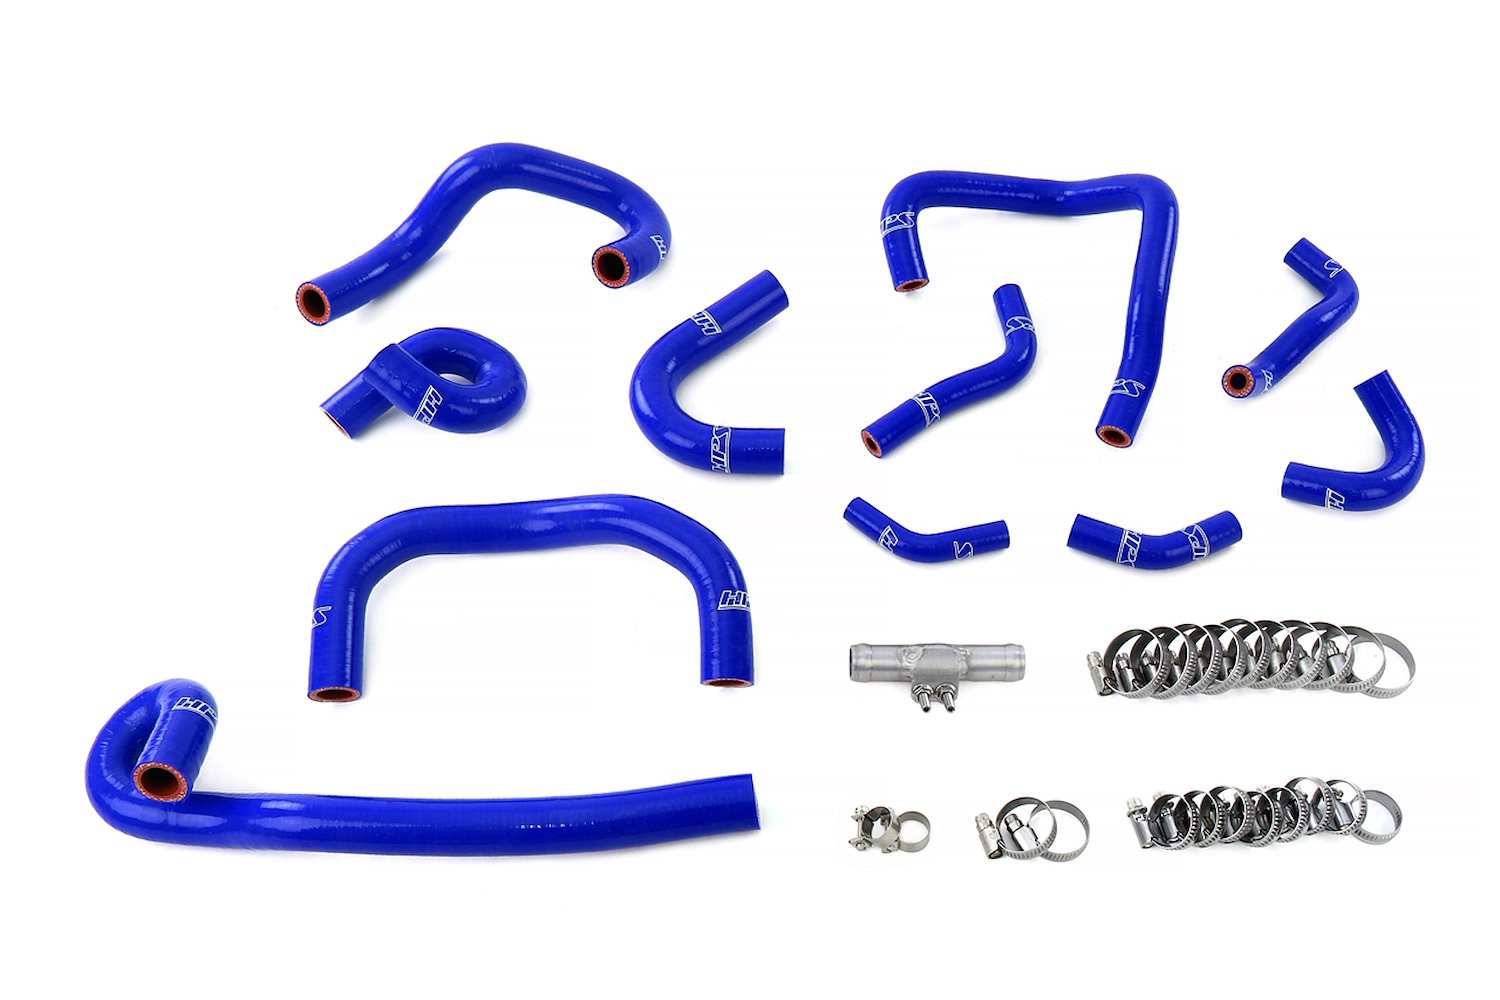 57-2139-BLUE Coolant Hose Kit, 3-Ply Reinforced Silicone, Replaces Rubber Ancillary Coolant & Heater Hoses